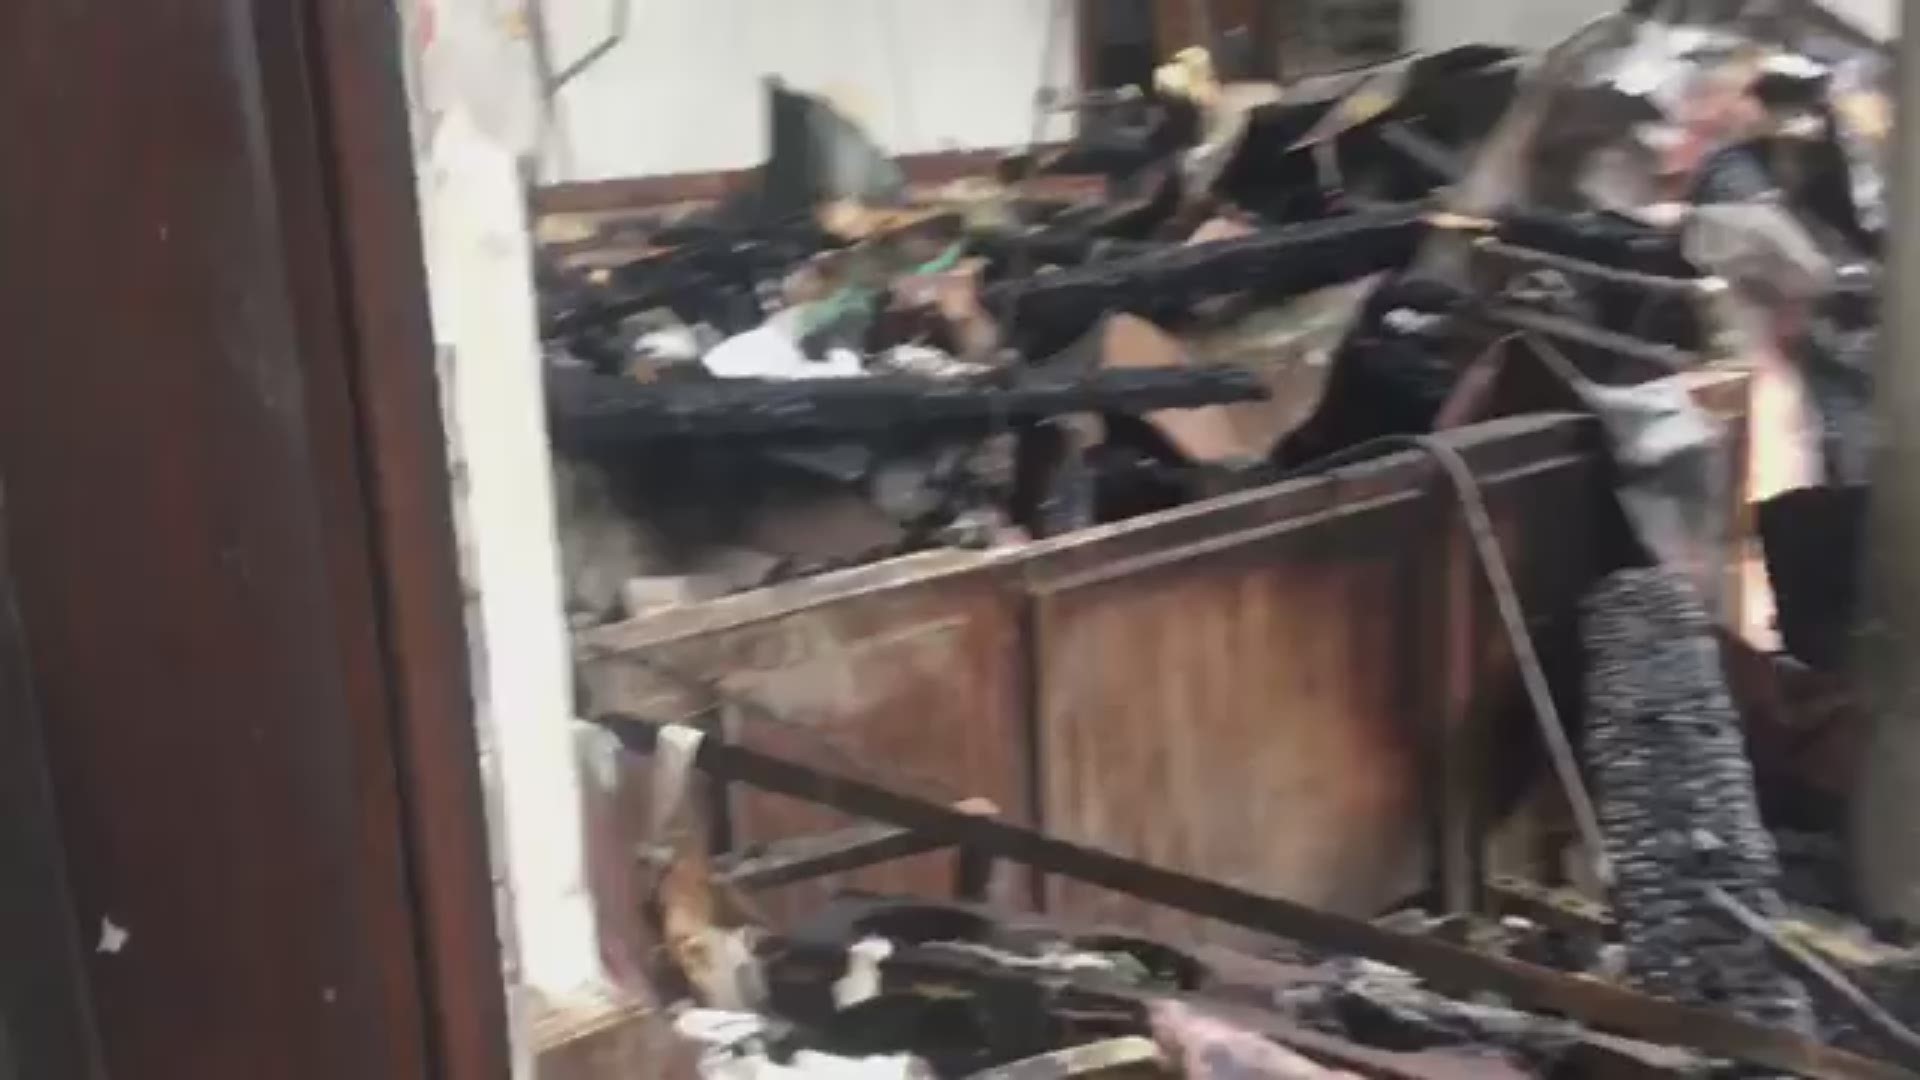 This video, taken by DAG Russell Johnson, shows the burned remains of a courtroom inside the historic Loudon Co. Courthouse in East Tennessee, two days after a devastating fire.